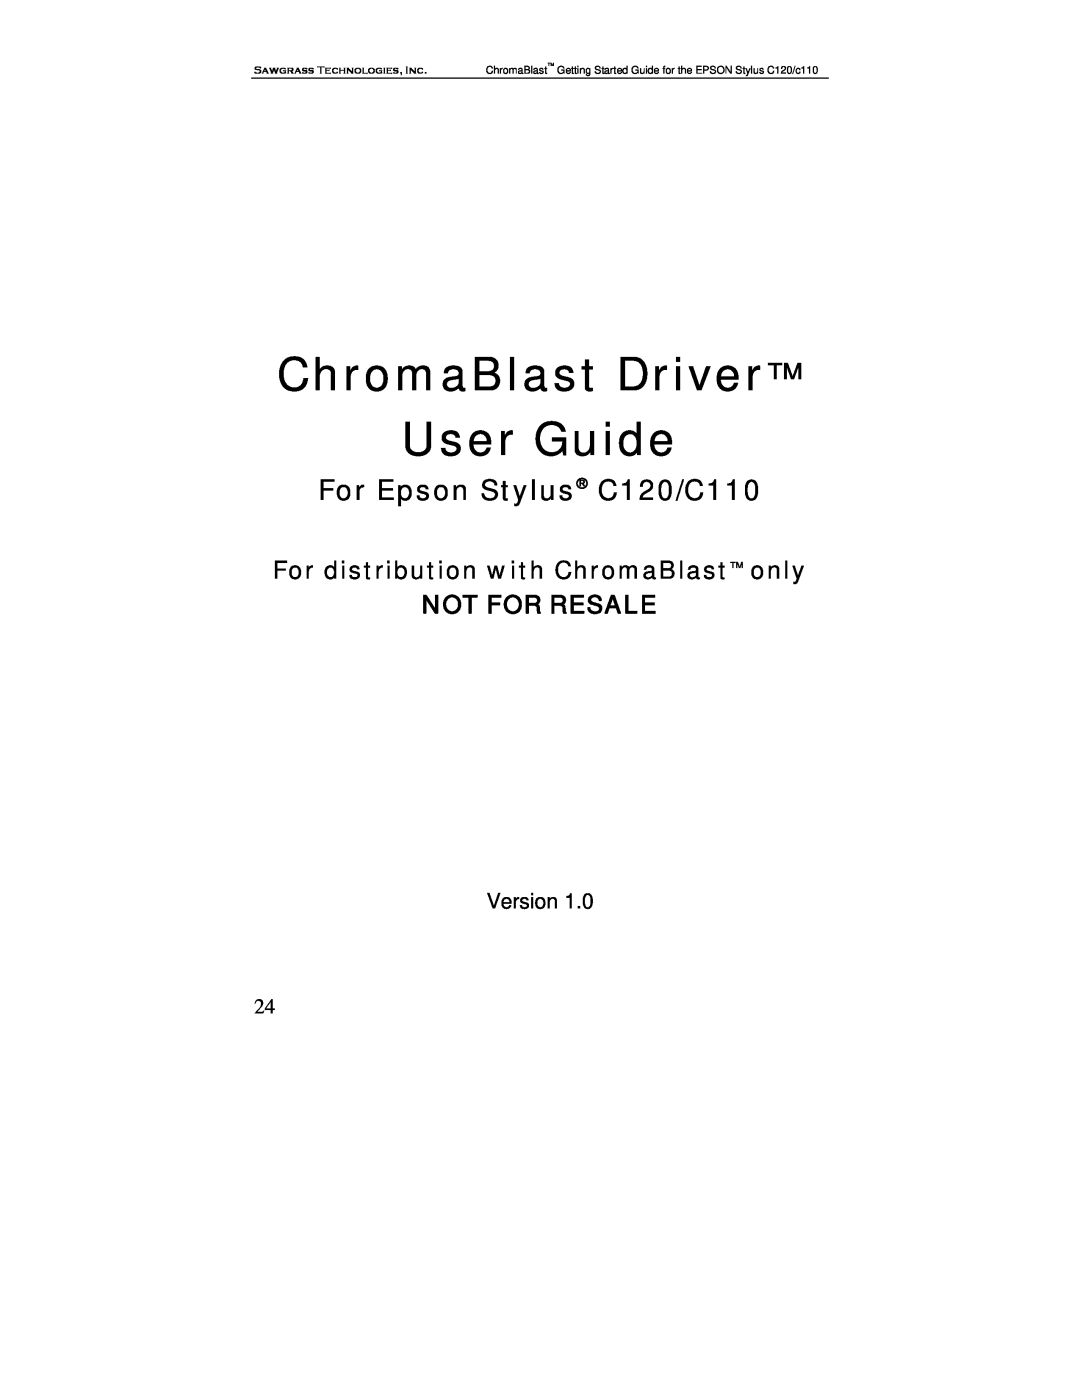 Epson C110, C120 manual For distribution with ChromaBlast only, Not For Resale, ChromaBlast Driver User Guide, Version 